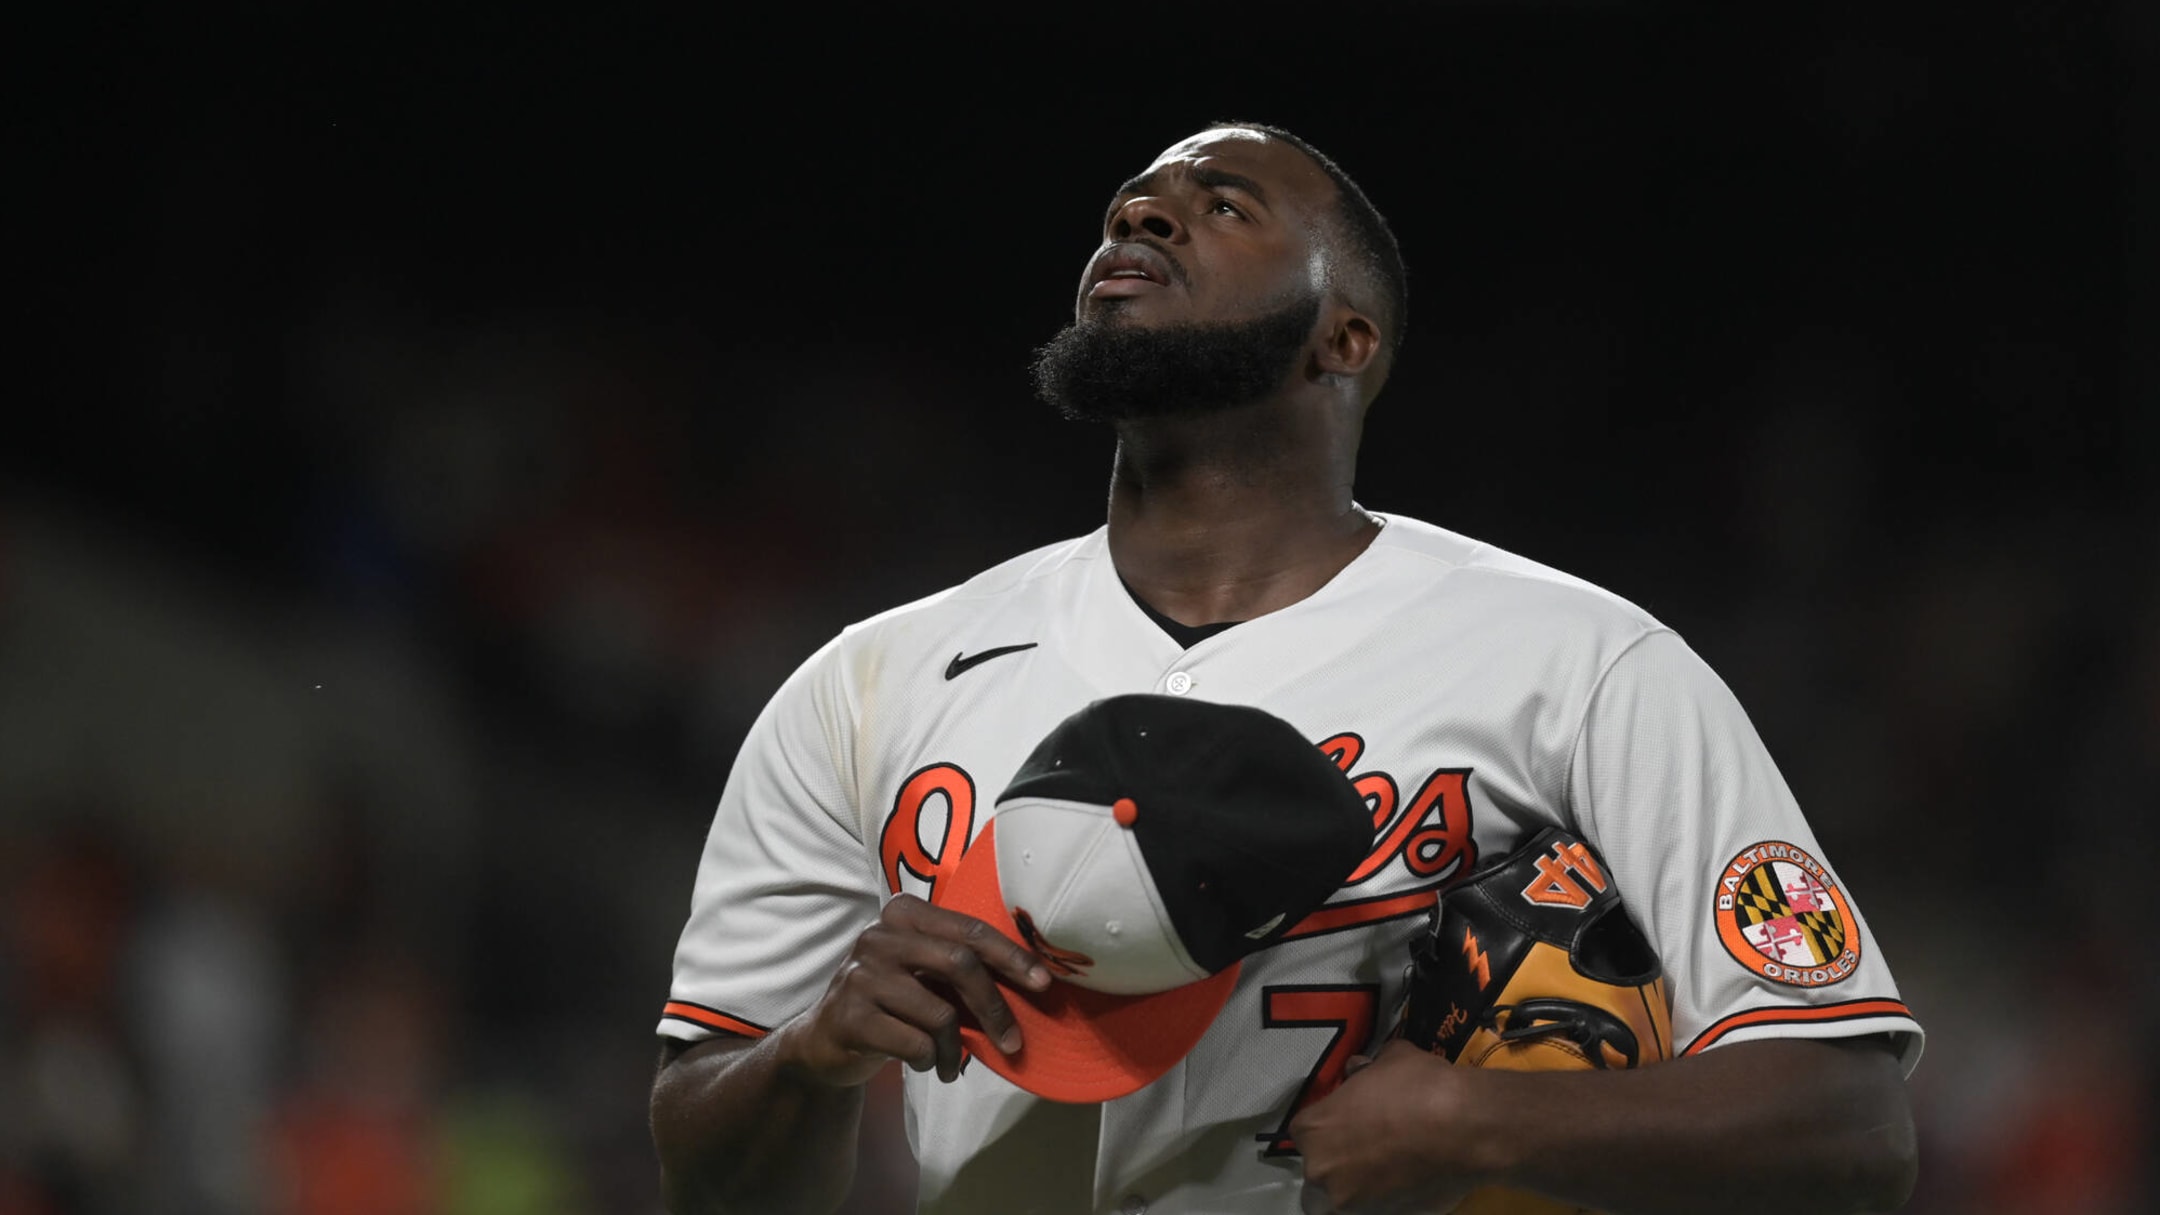 Orioles All-Star closer leaves game with 'arm discomfort